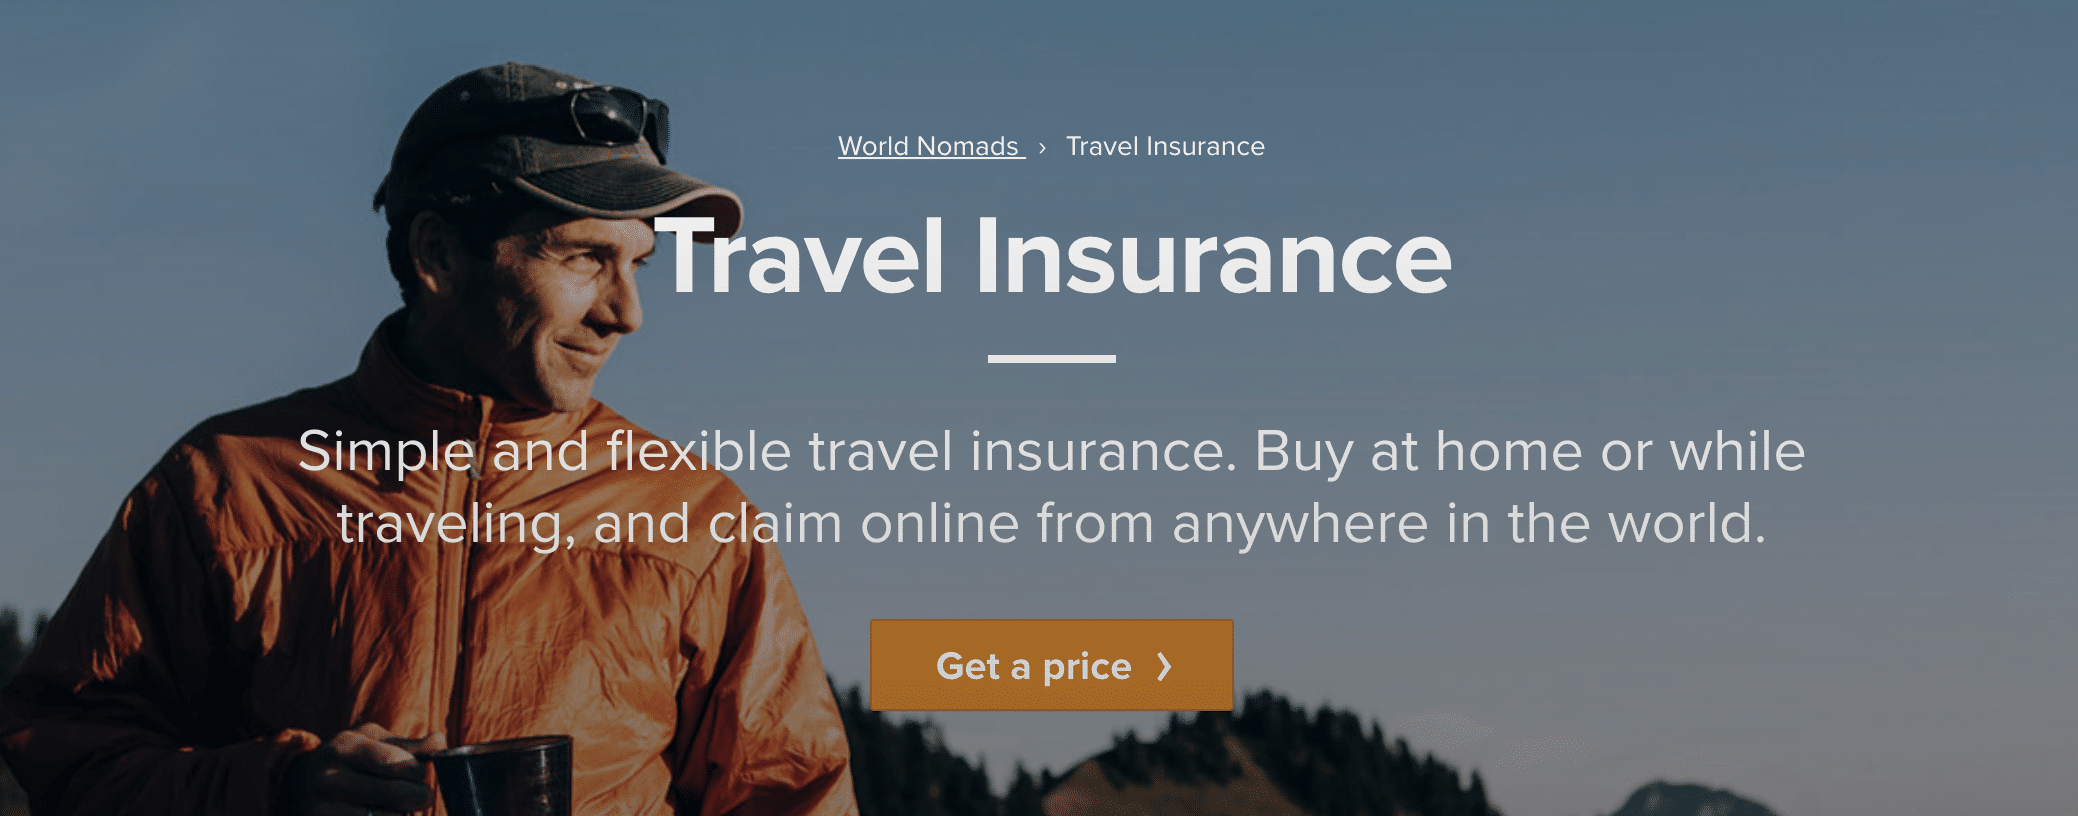 World Nomads vs SafetyWing: Get a quote for World Nomads travel insurance